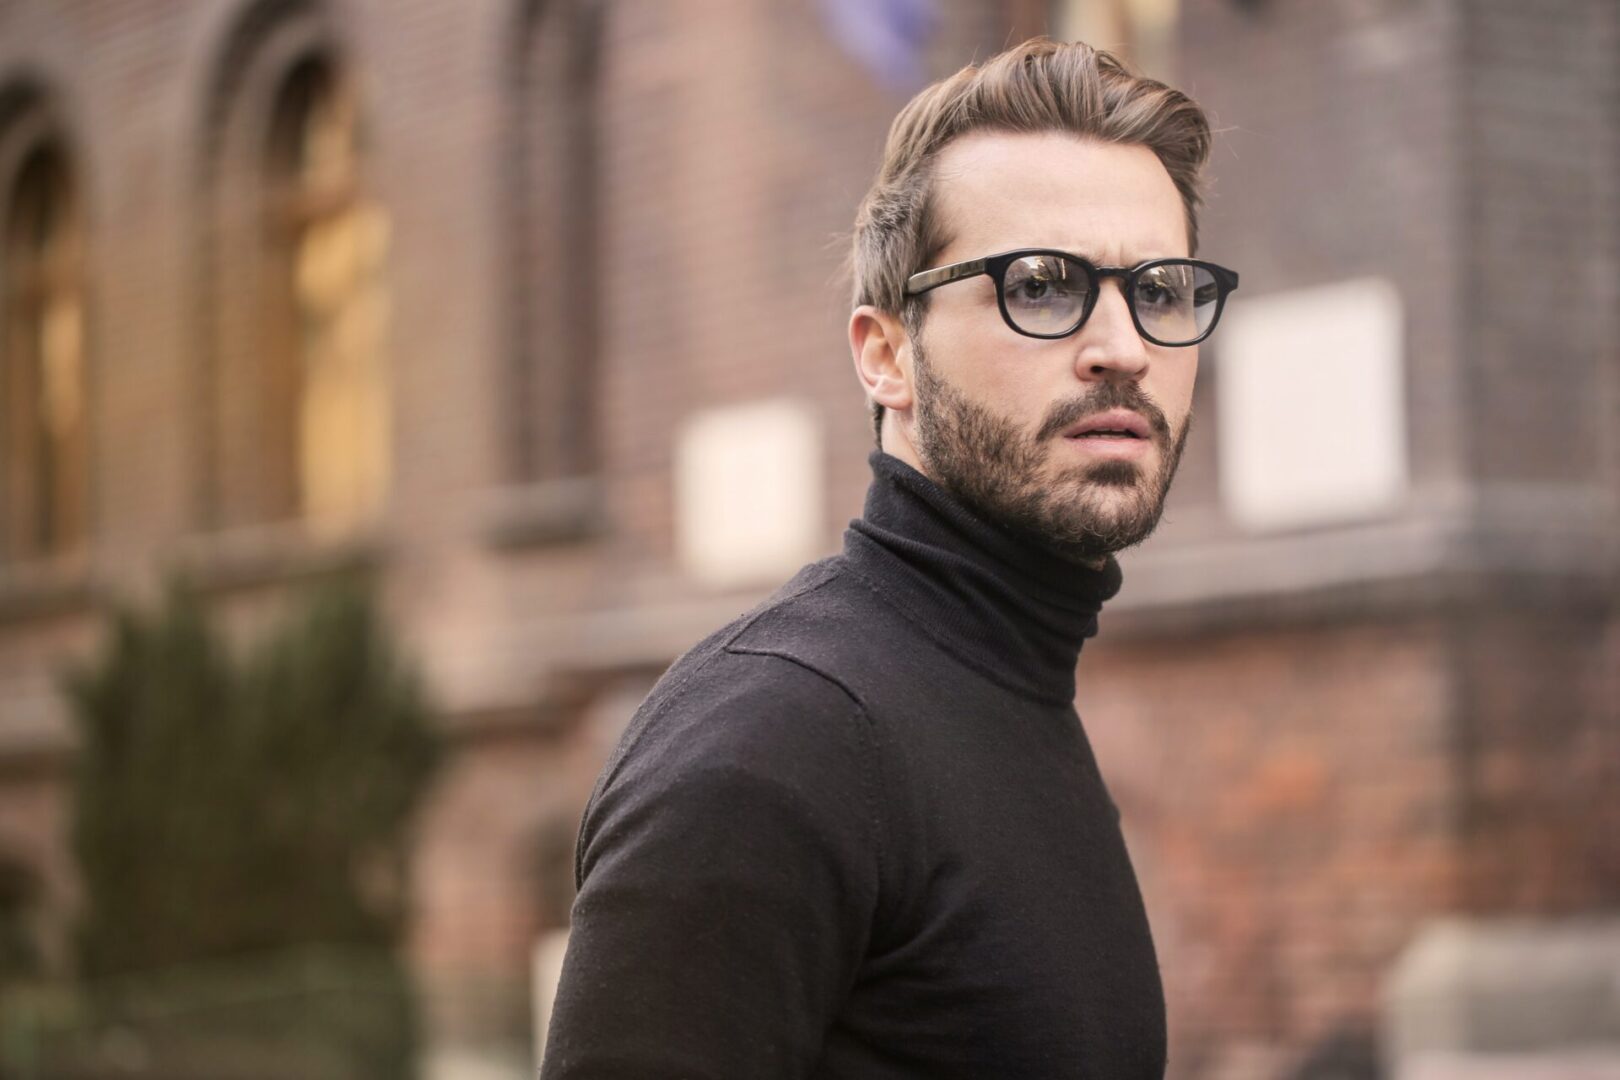 A man with glasses and a beard wearing a black sweater.